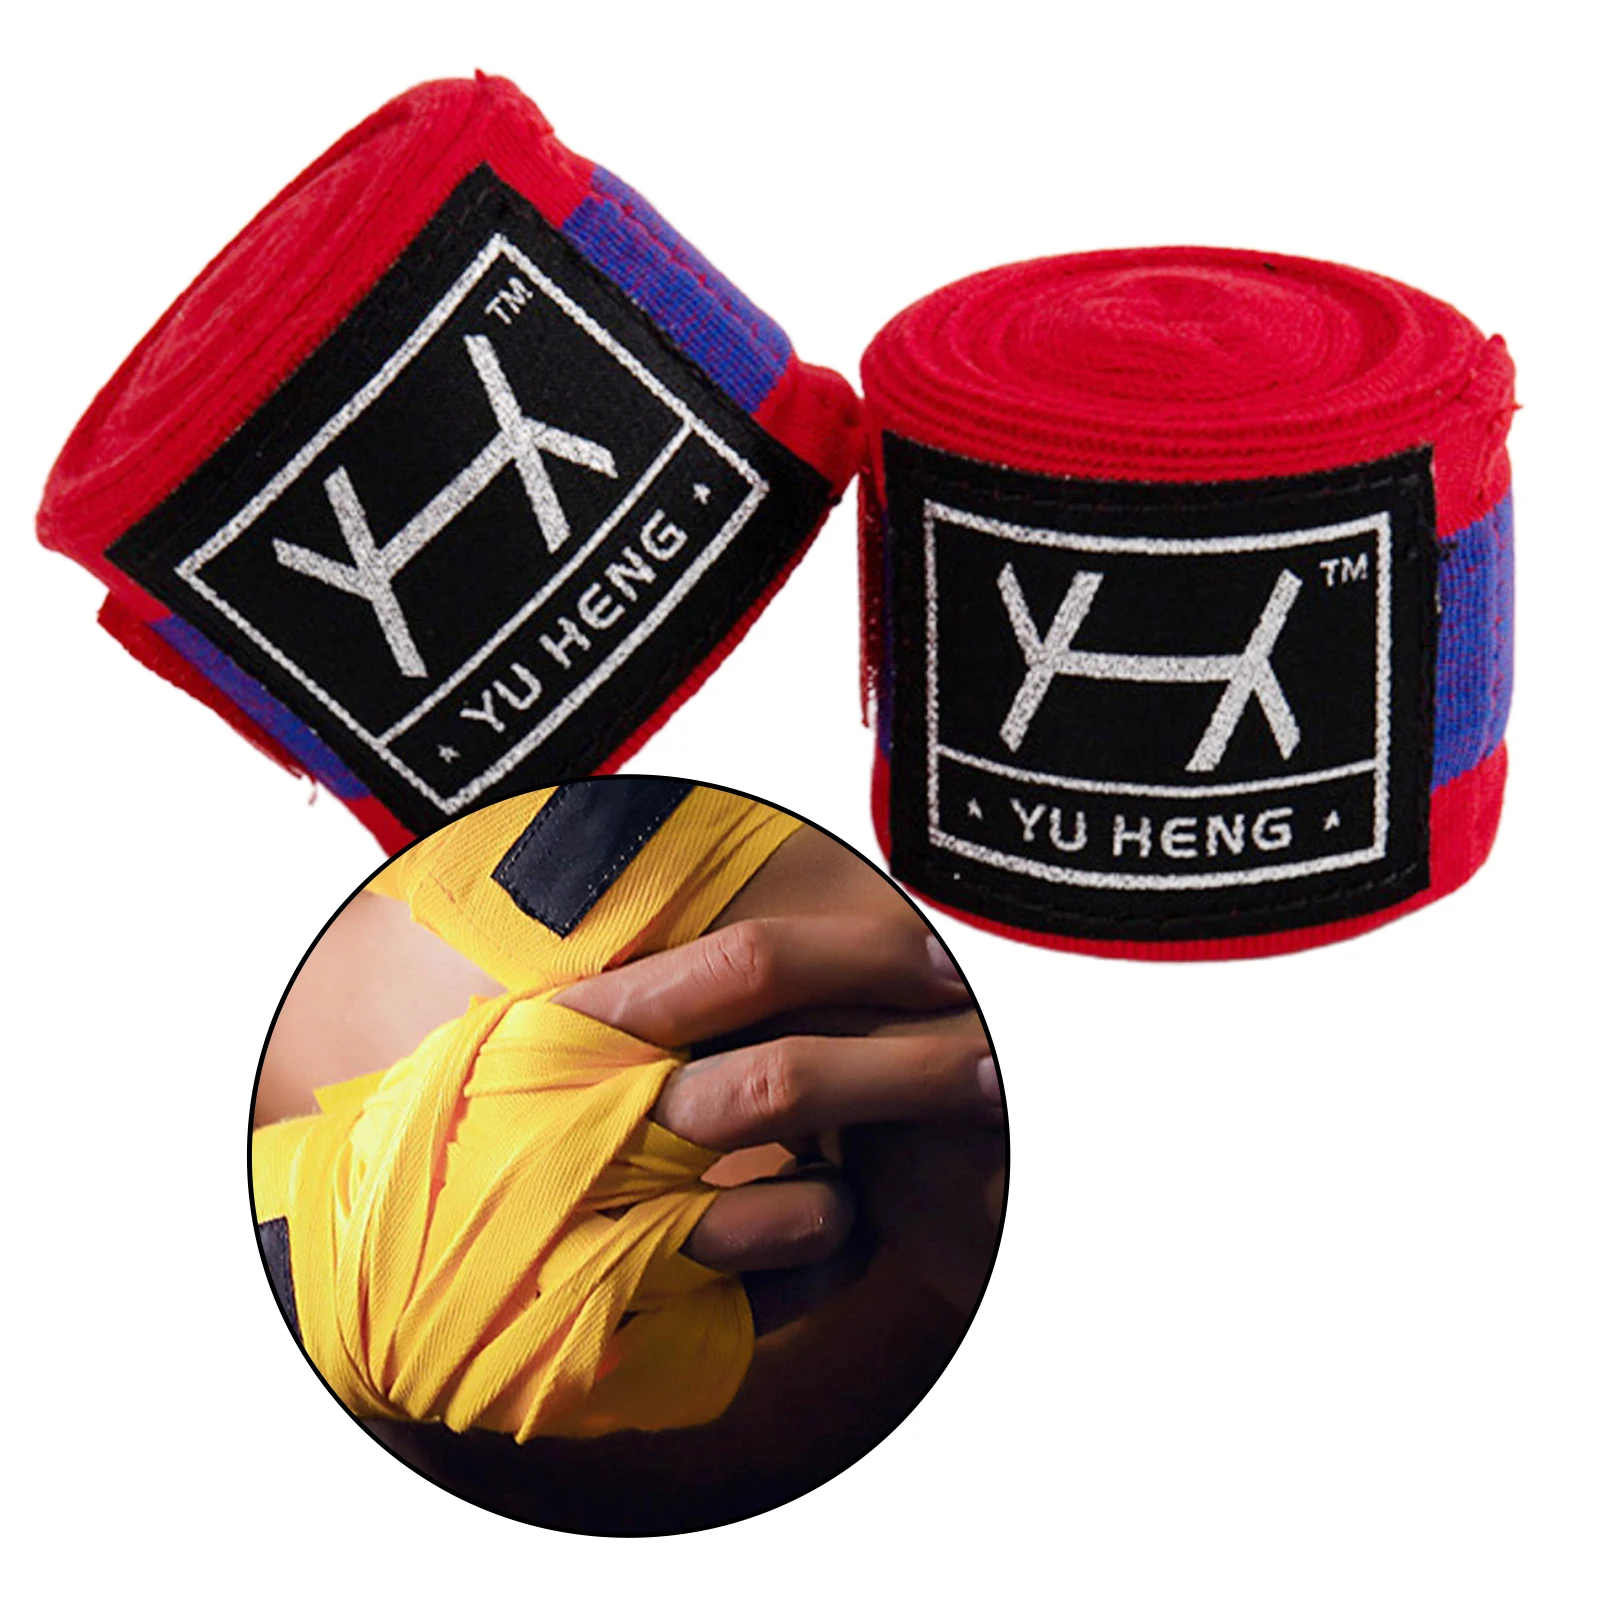 Muay Thai Kickboxing MMA Training Details about   Breathable Boxing Handwraps 196" with Closure 